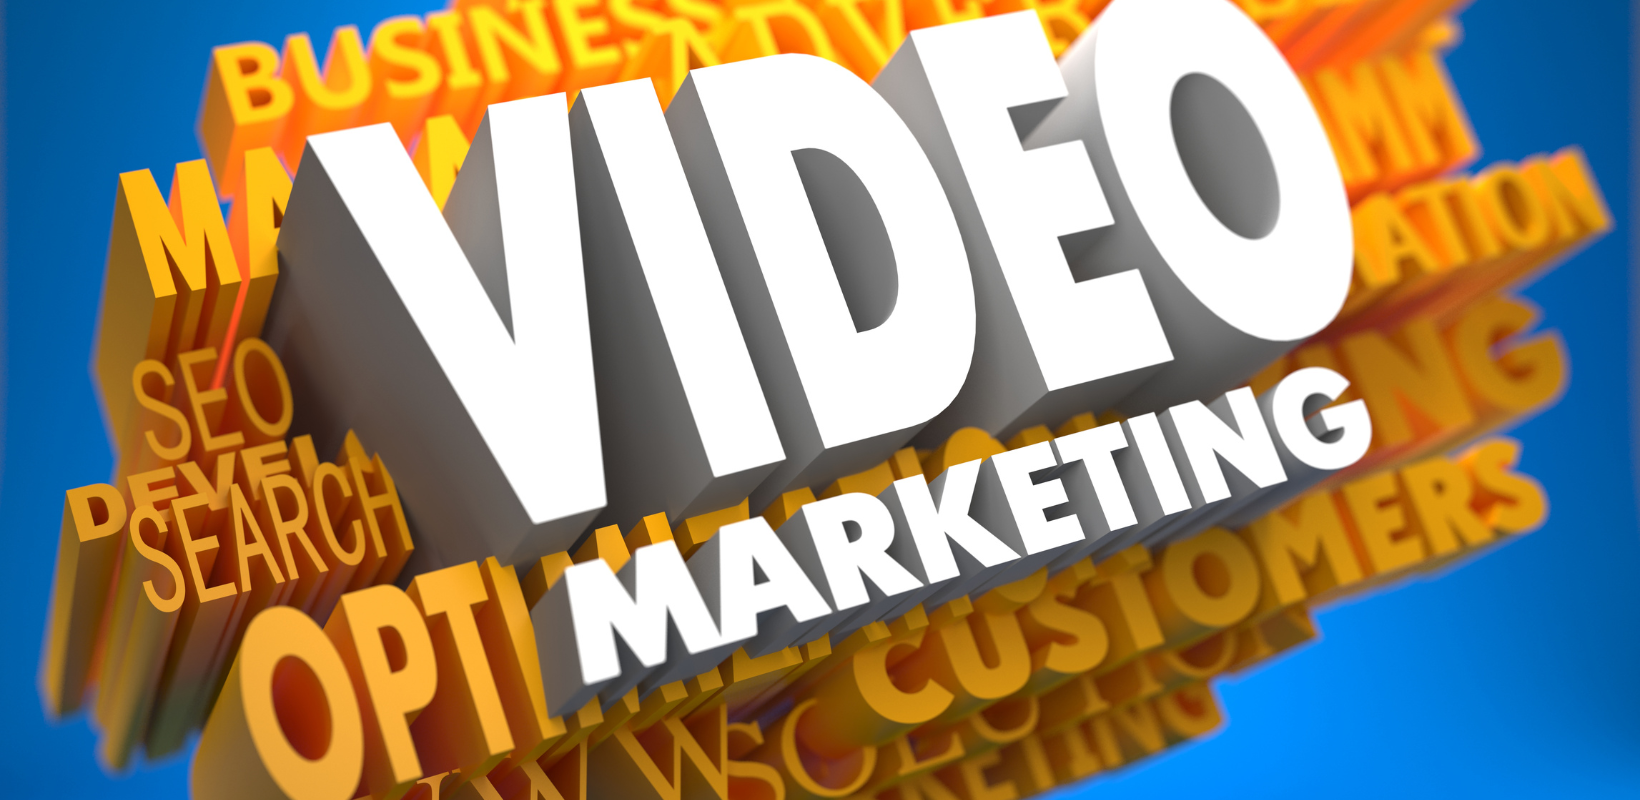 The Only Video Marketing Guide for eCommerce You Need In 2022